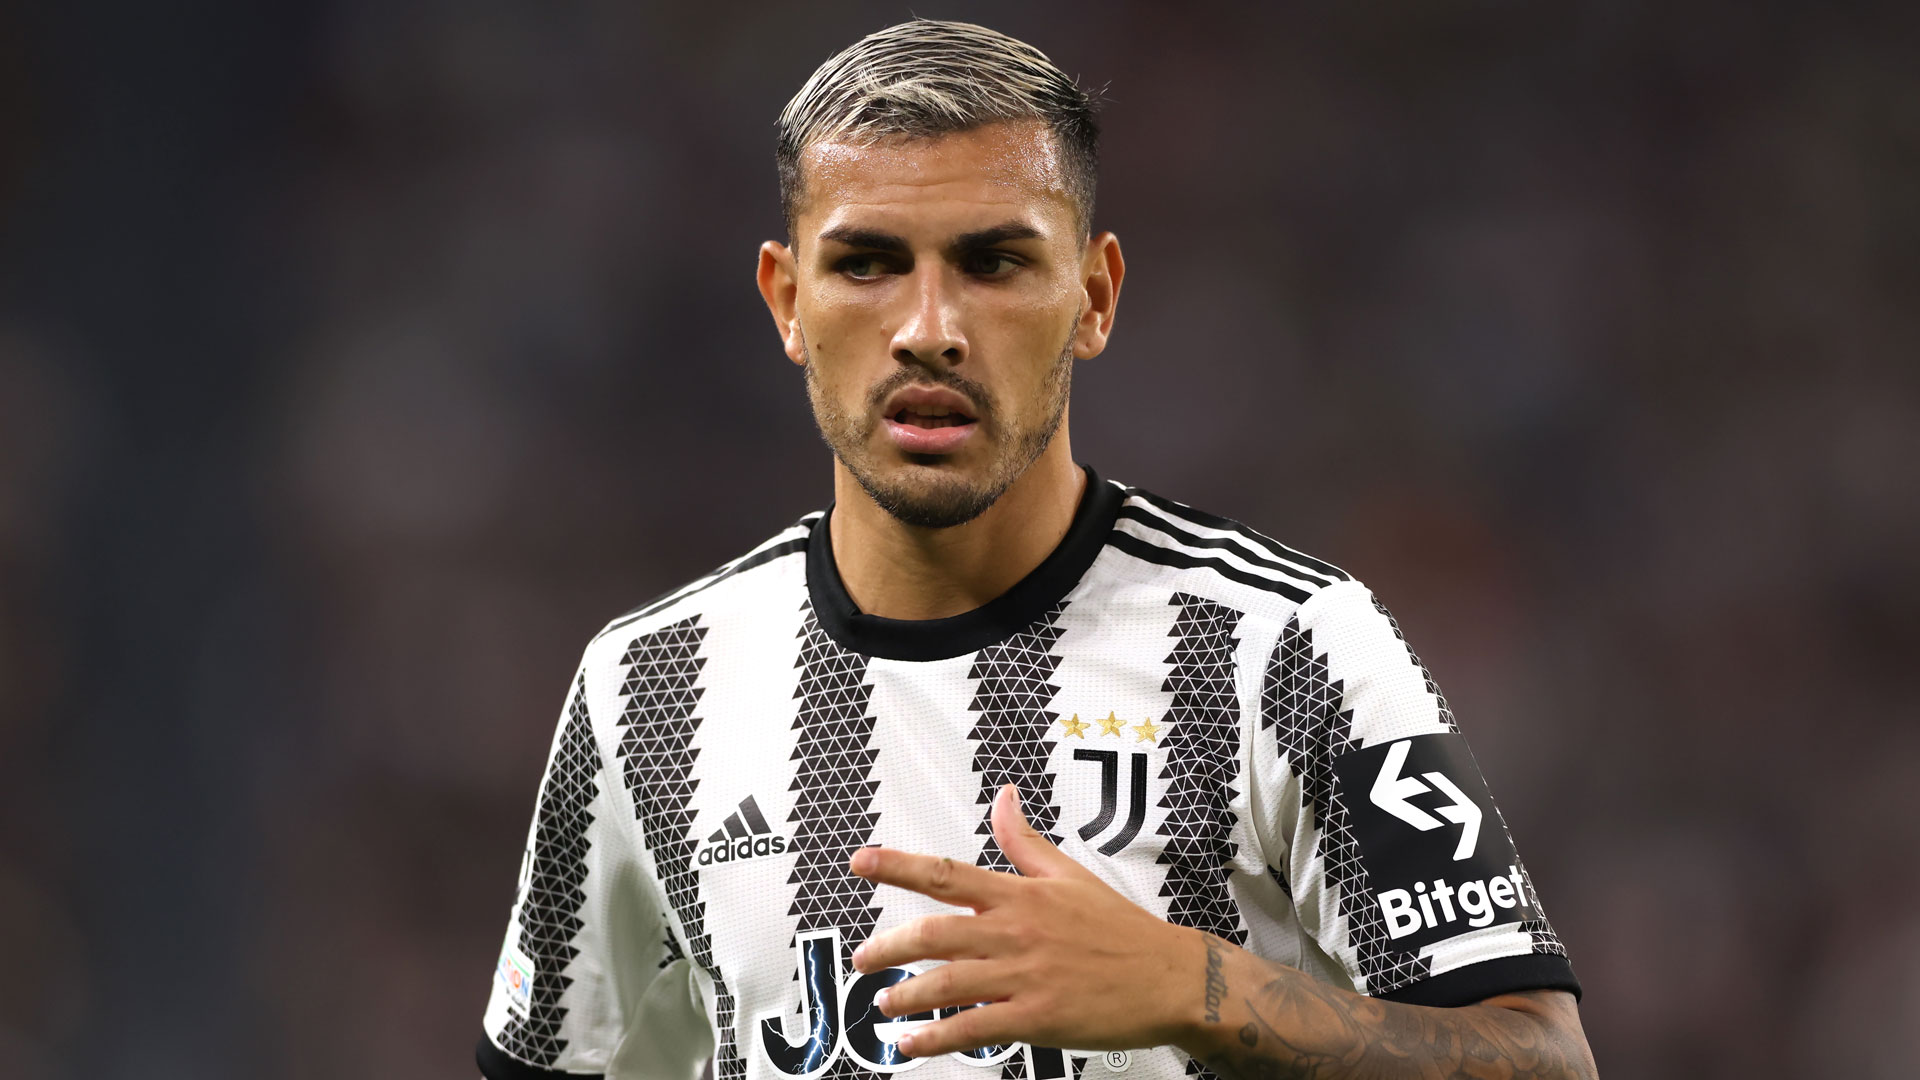 Juventus signed Leandro Paredes on loan from PSG last summer, and a few conditions would force them to buy him out at the end of the season.